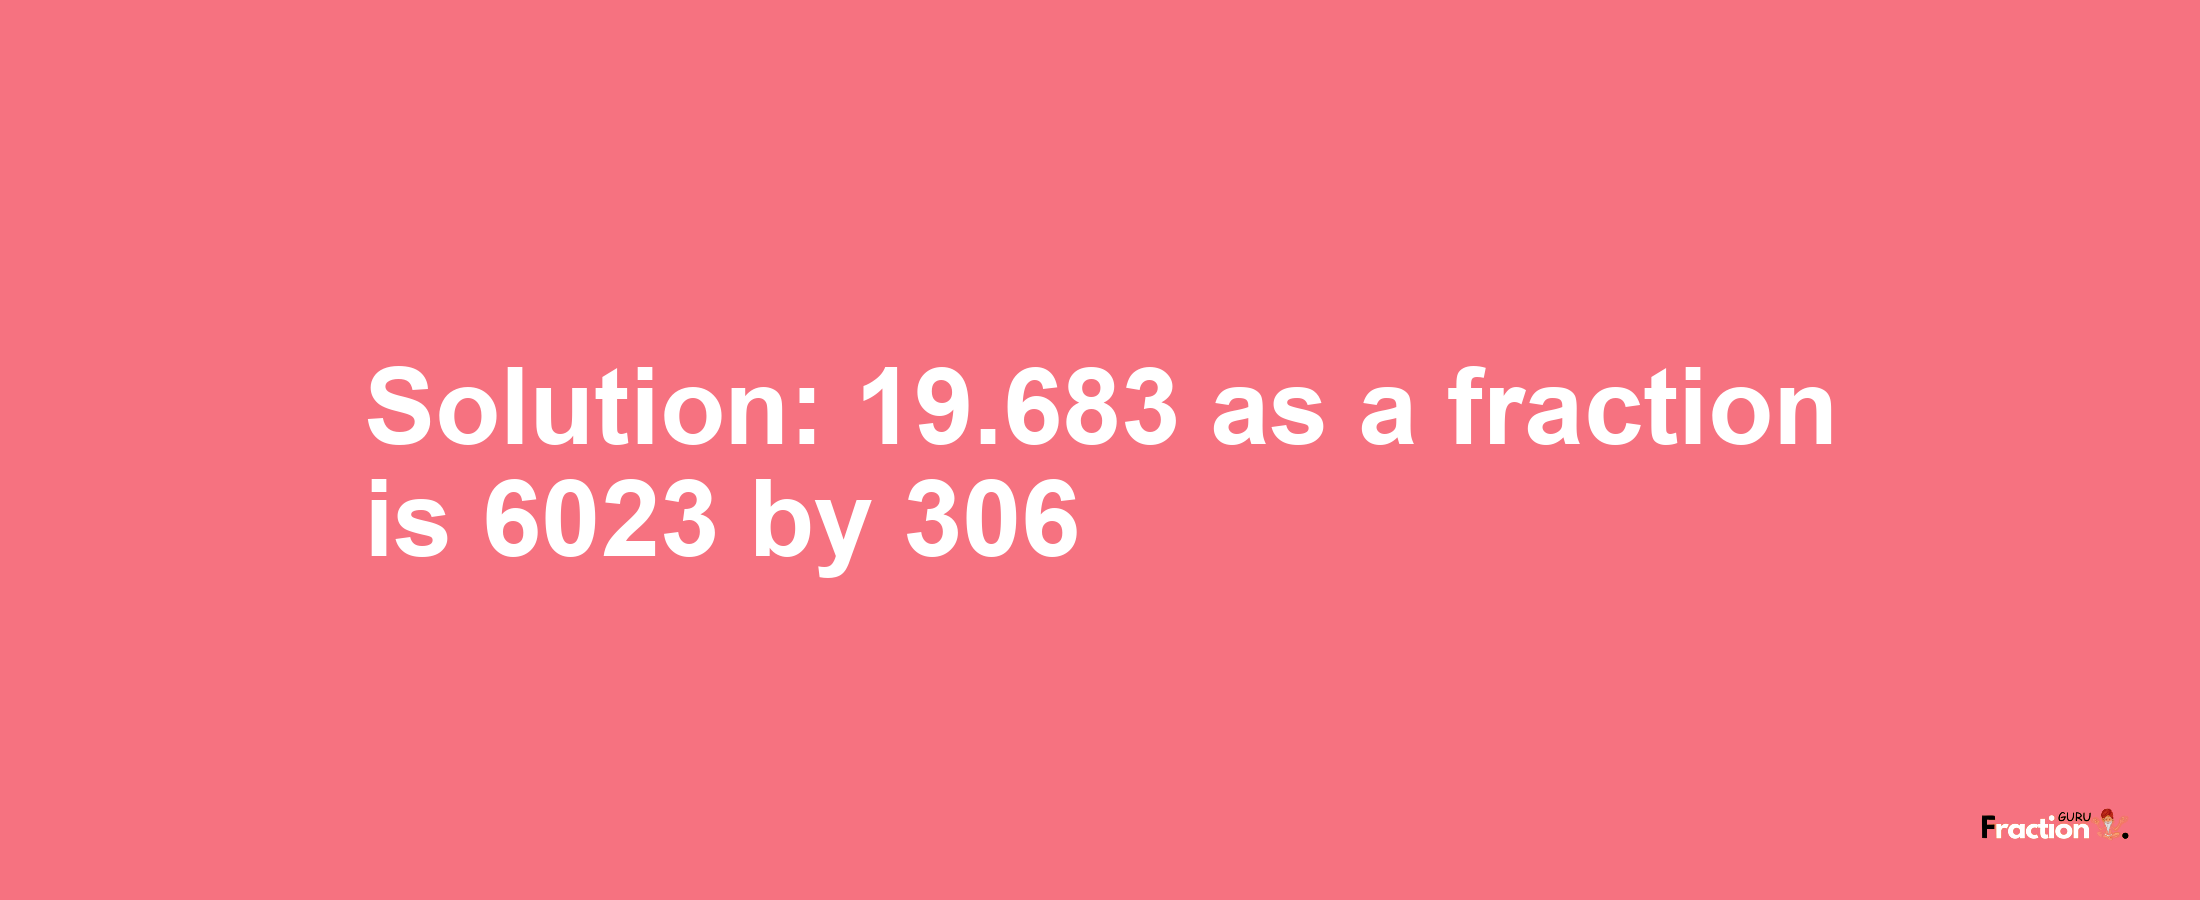 Solution:19.683 as a fraction is 6023/306